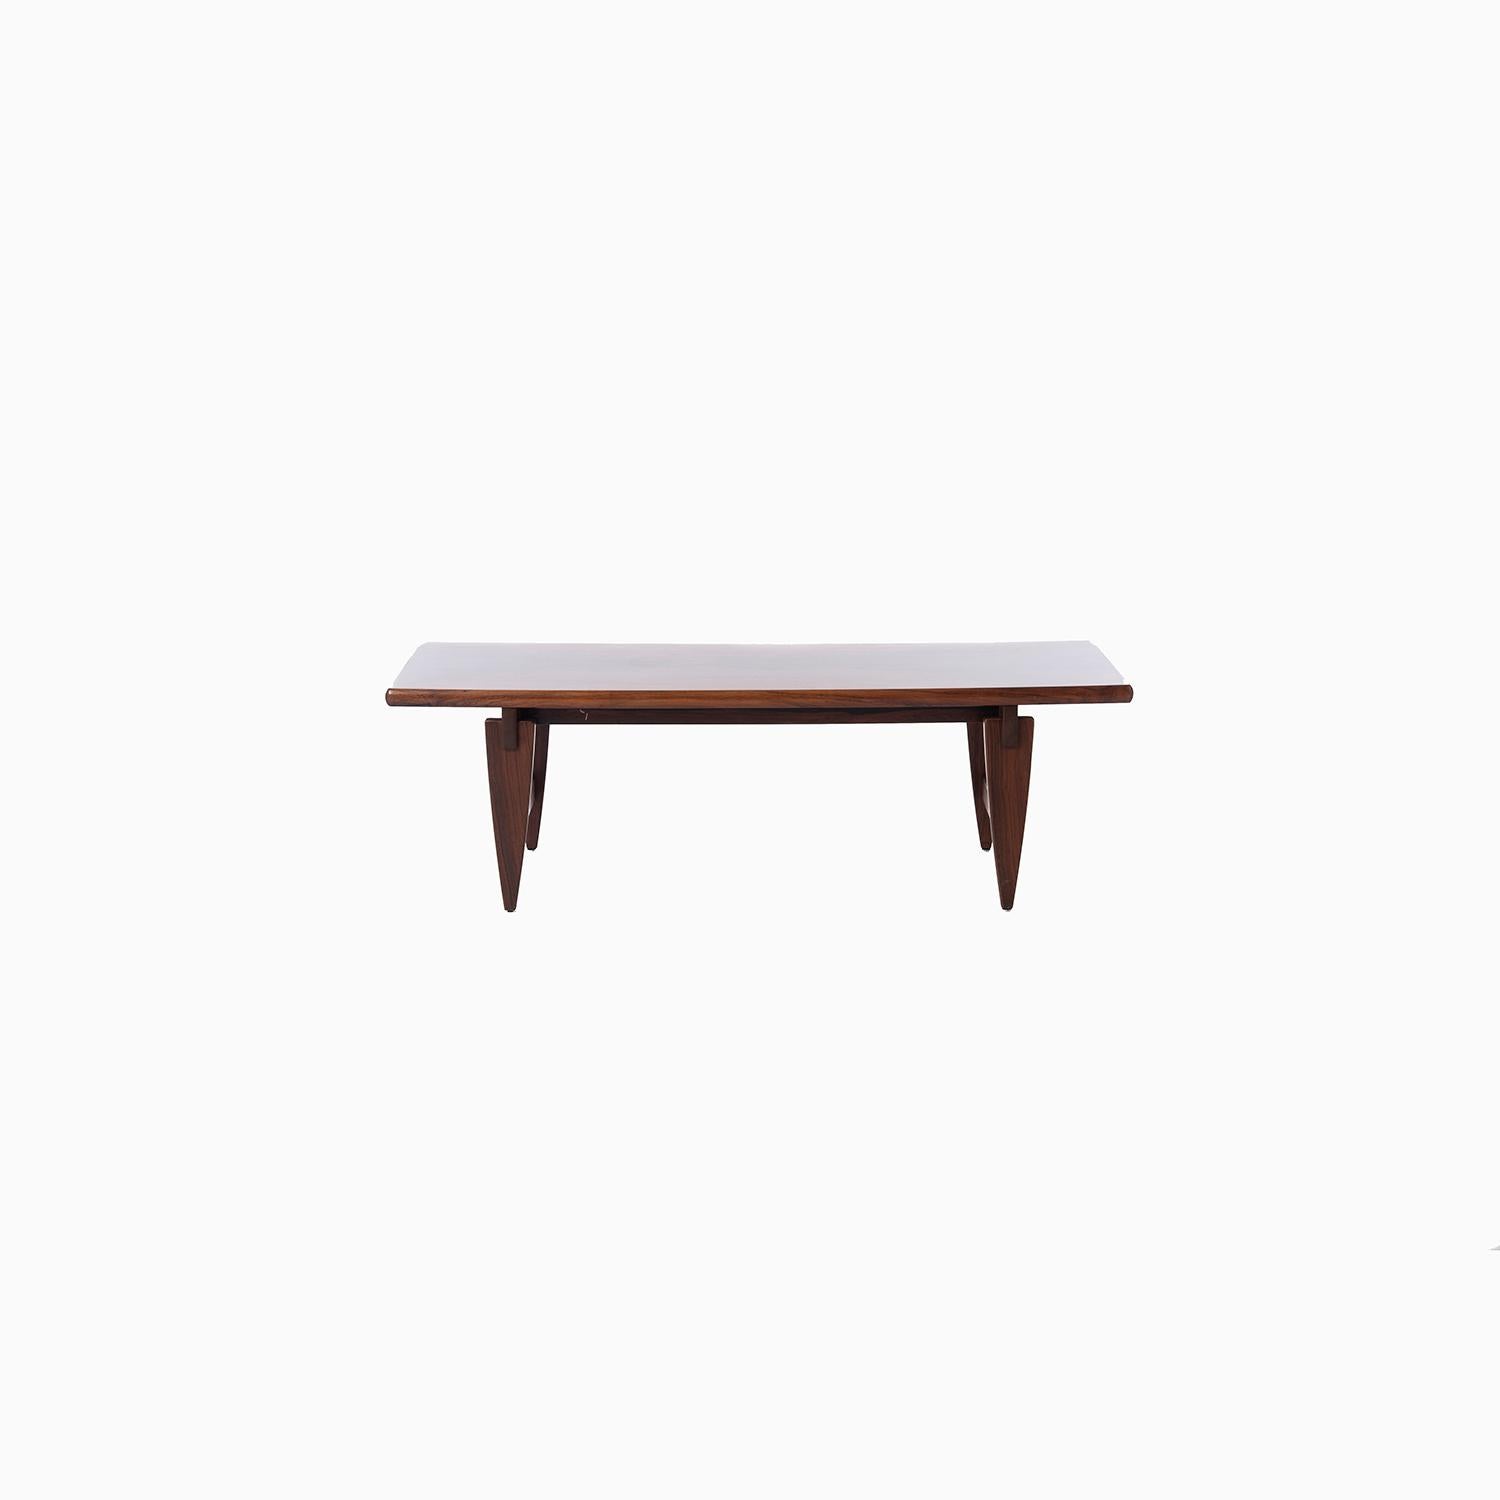 Large scale Brazilian rosewood coffee table designed by Illum Wikkelsø.


Professional, skilled furniture restoration is an integral part of what we do every day. Our goal 
is to provide beautiful, functional furniture that honors its